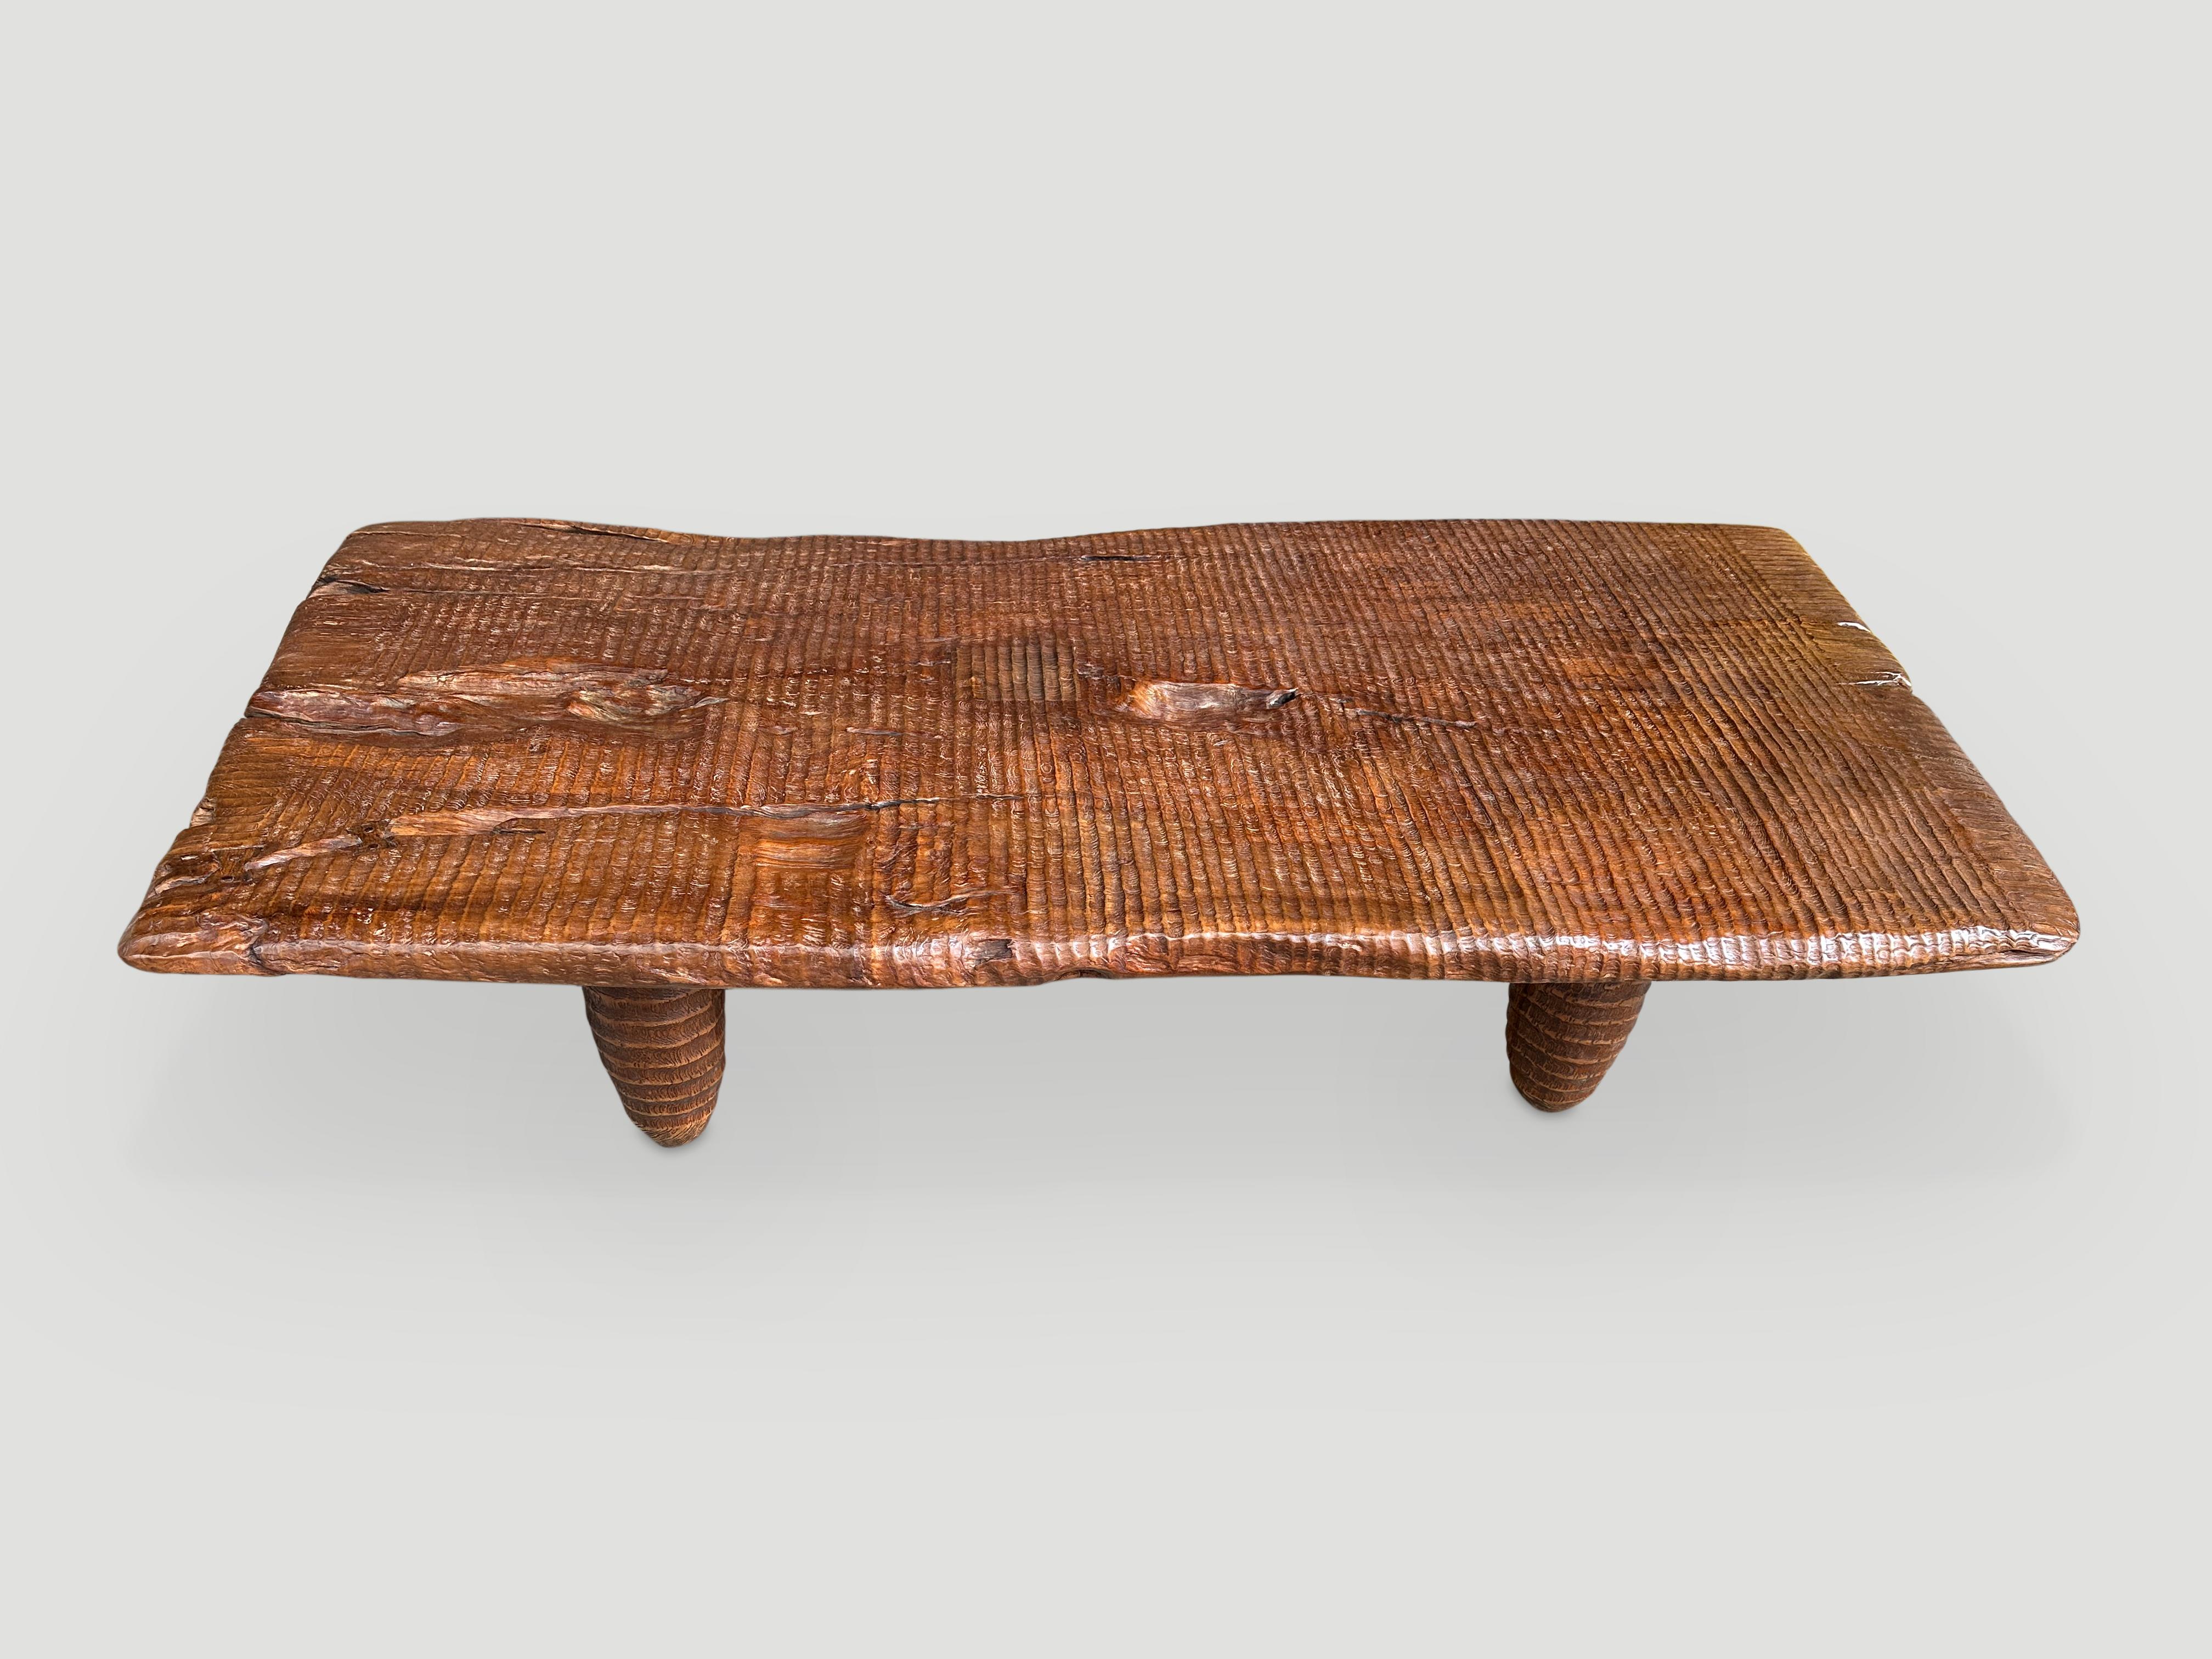 Organic Modern Andrianna Shamaris Rare Midcentury Style Couture Coffee Table For Sale